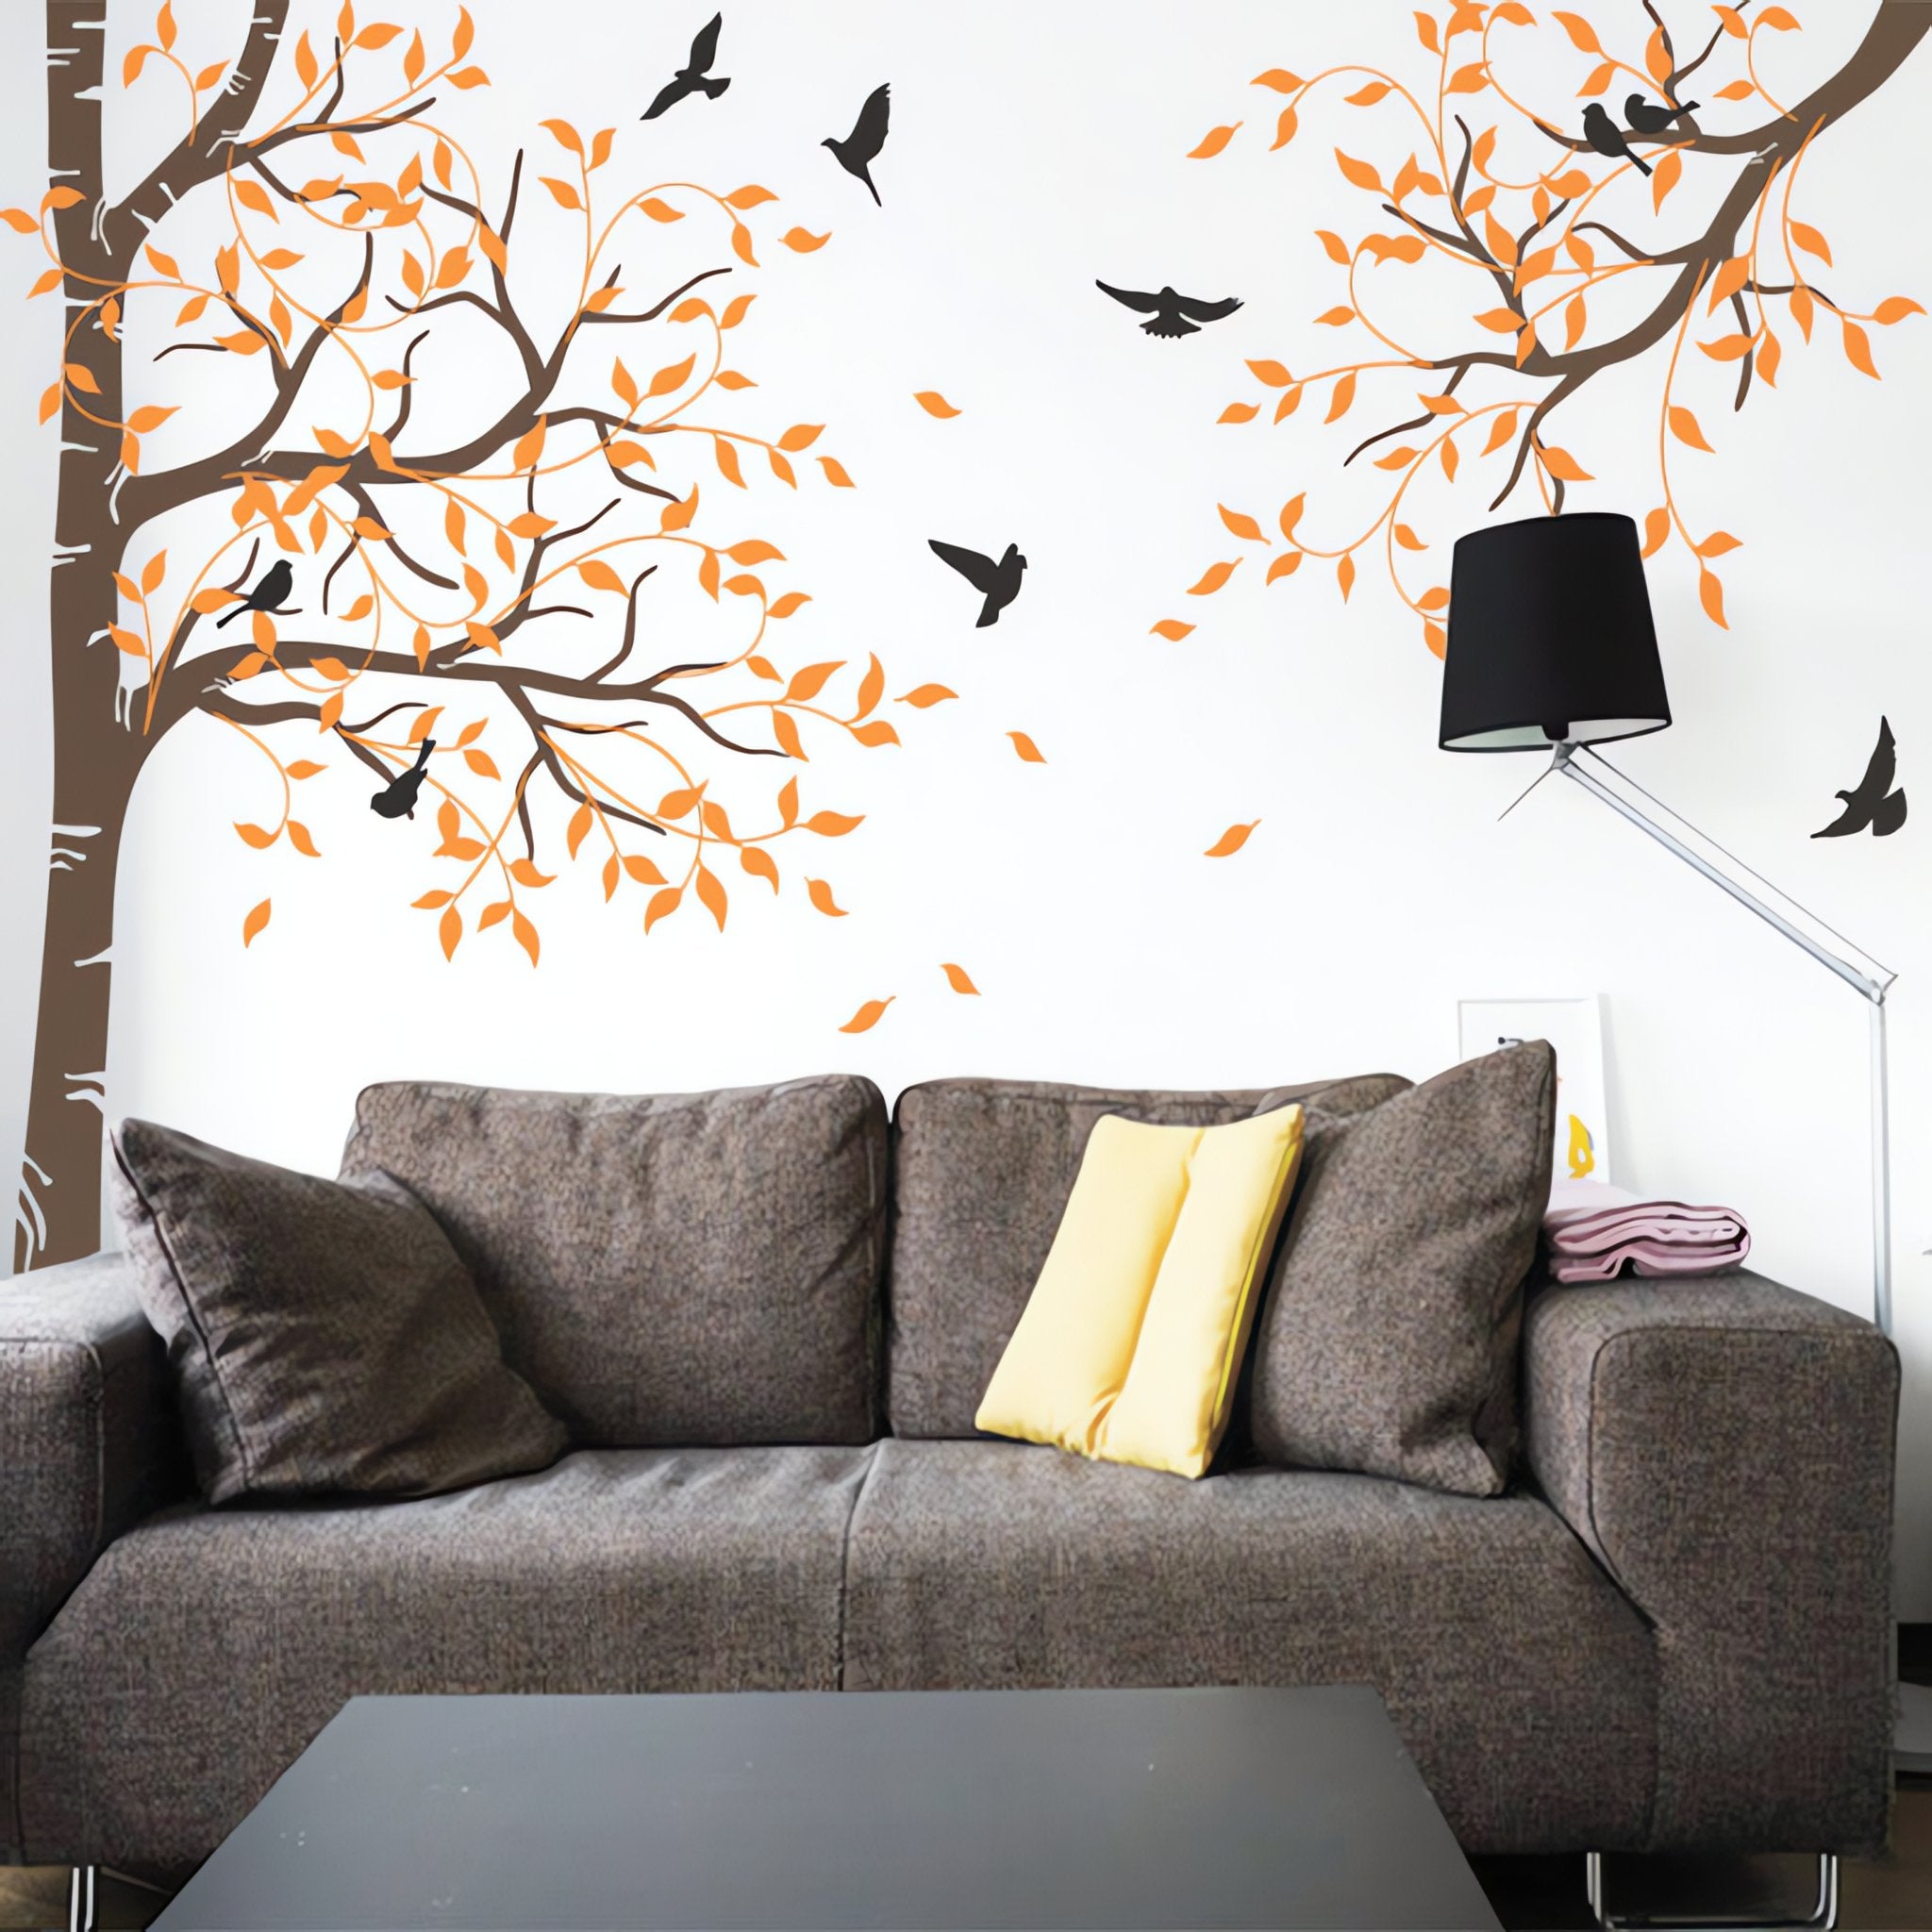 Tree wall sticker with birds and a hanging branch on the right in a living area with a sofa.